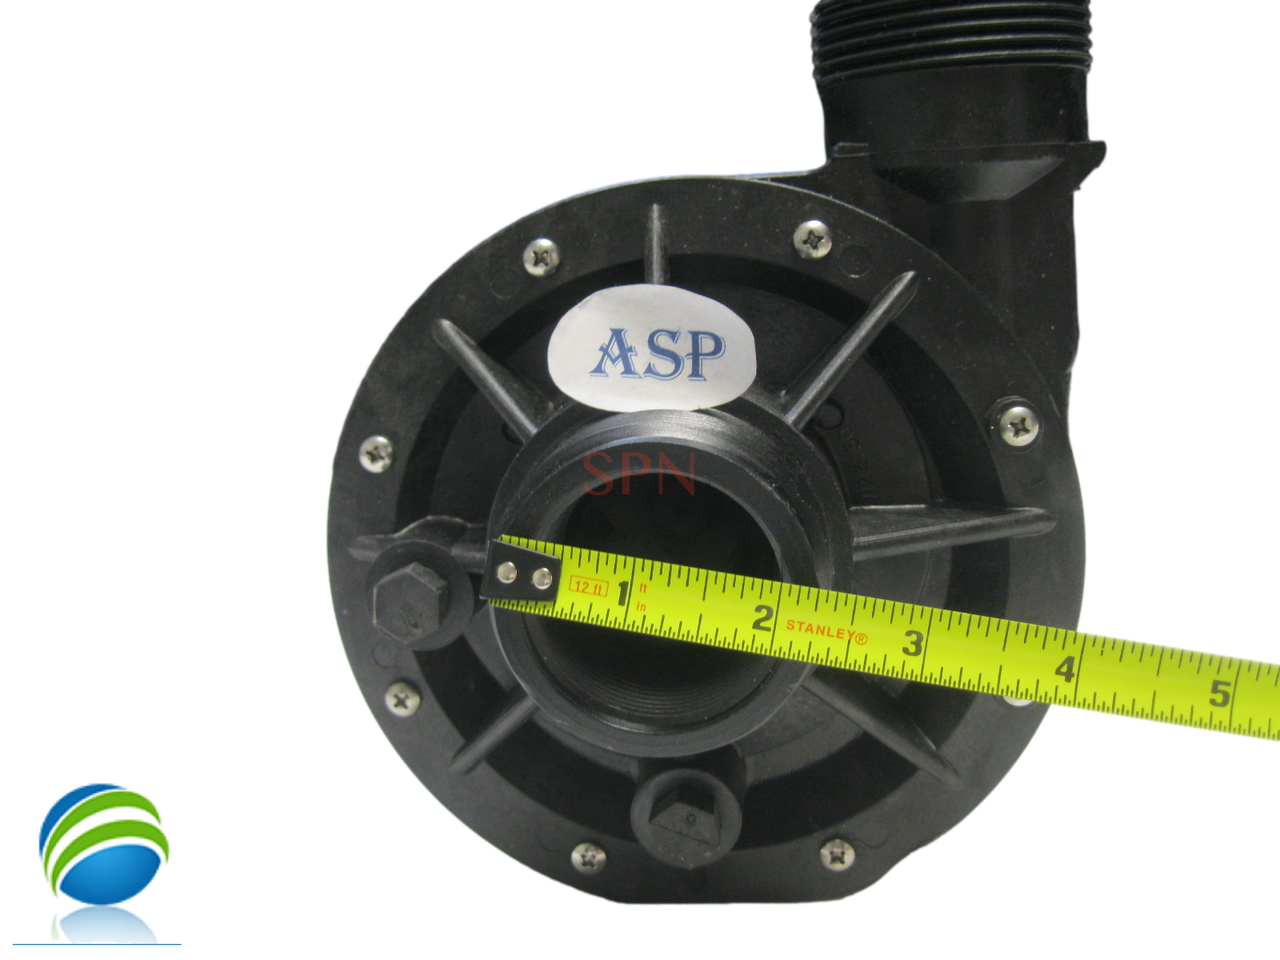 The inlet and outlet measure about 2 5/16" across the threads..
Complete Pump, Aqua-Flo, FMHP, 1.0HP, 230v, 2-spd,48fr,1-1/2".1 or 2 Speed 6.8A